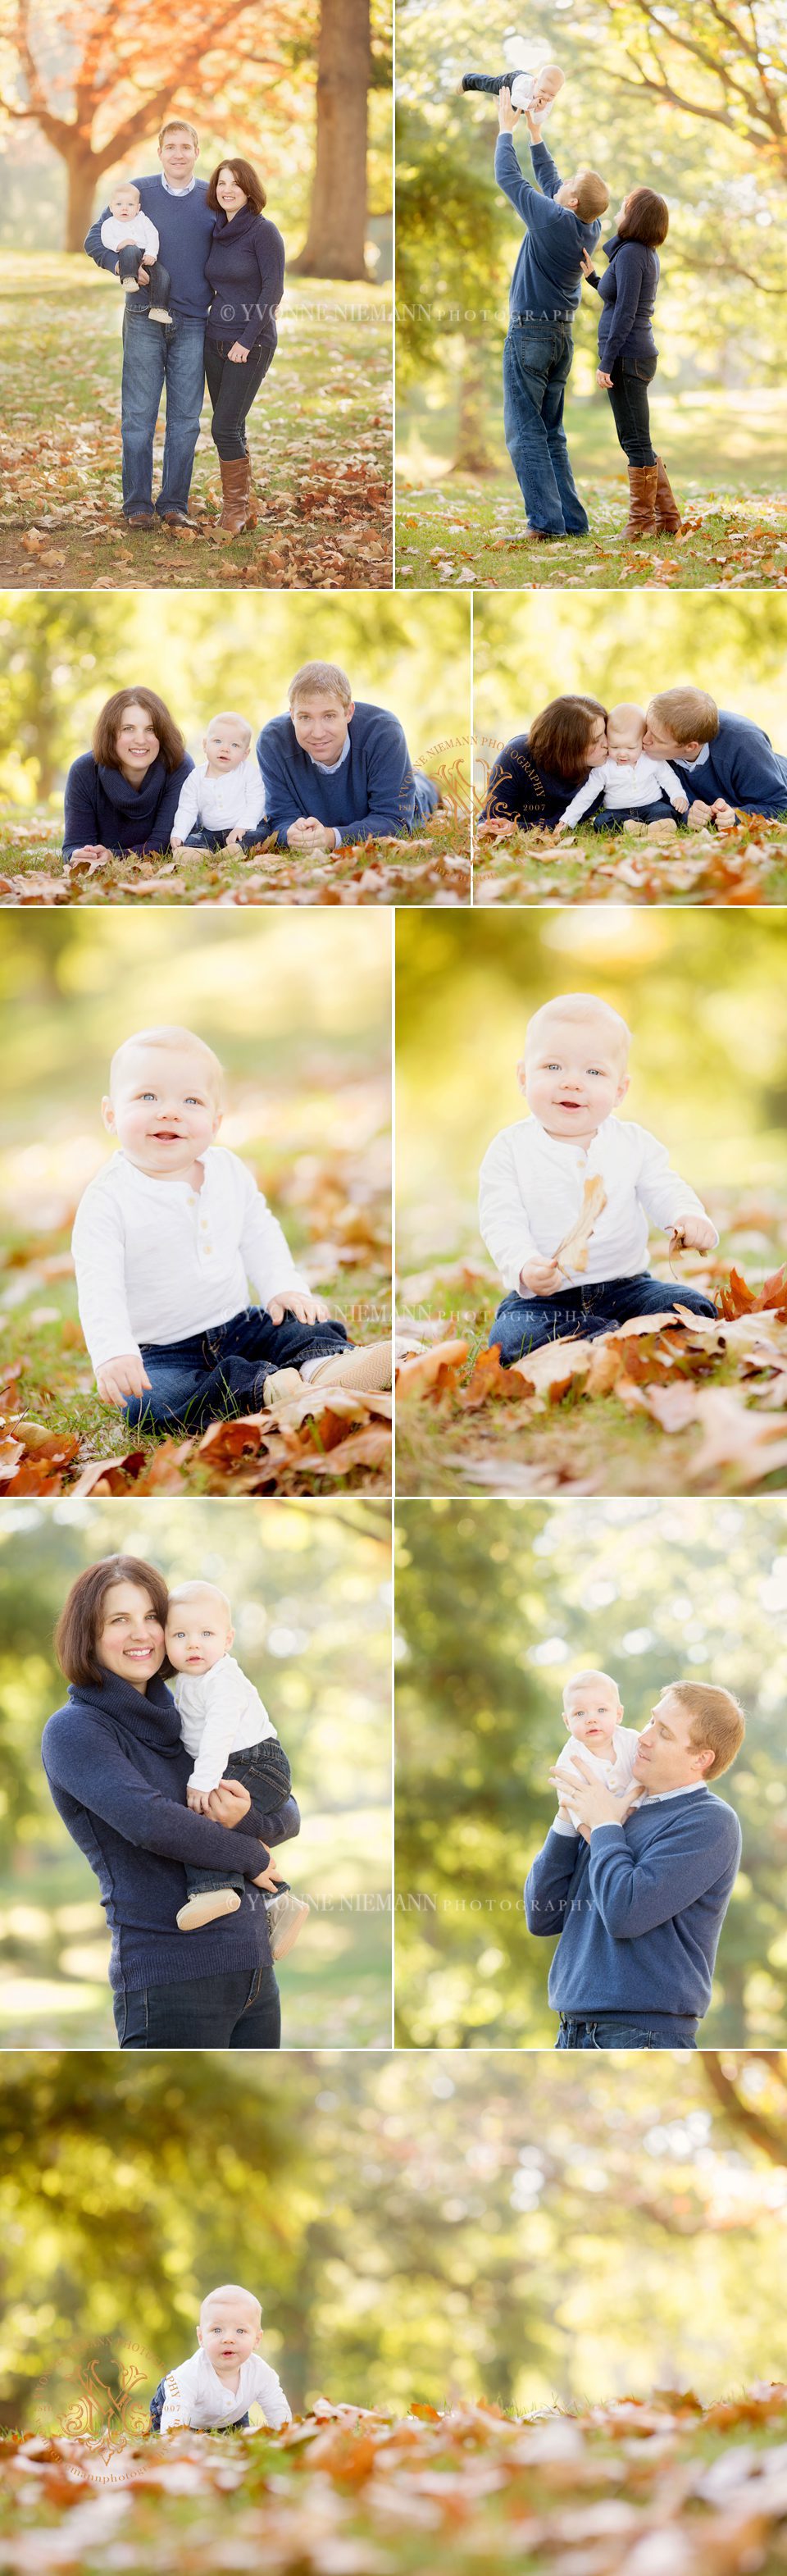 St. Louis family portraits in the early fall in Forest Park by Yvonne Niemann Photography.